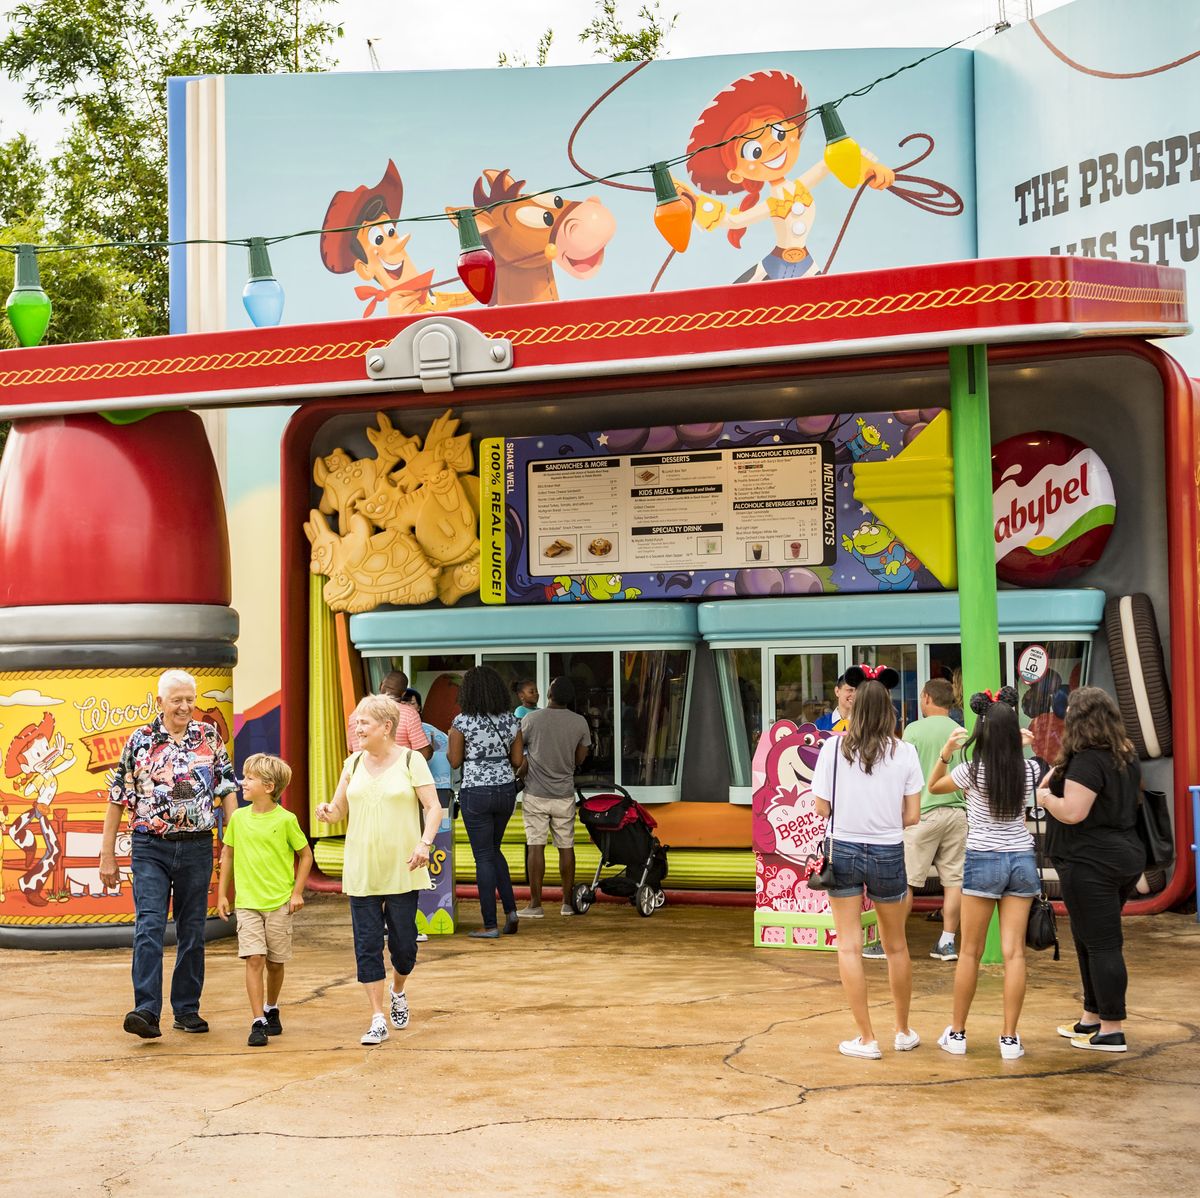 FIRST LOOK at New Toy Story Land Gift Shop in Disney World 